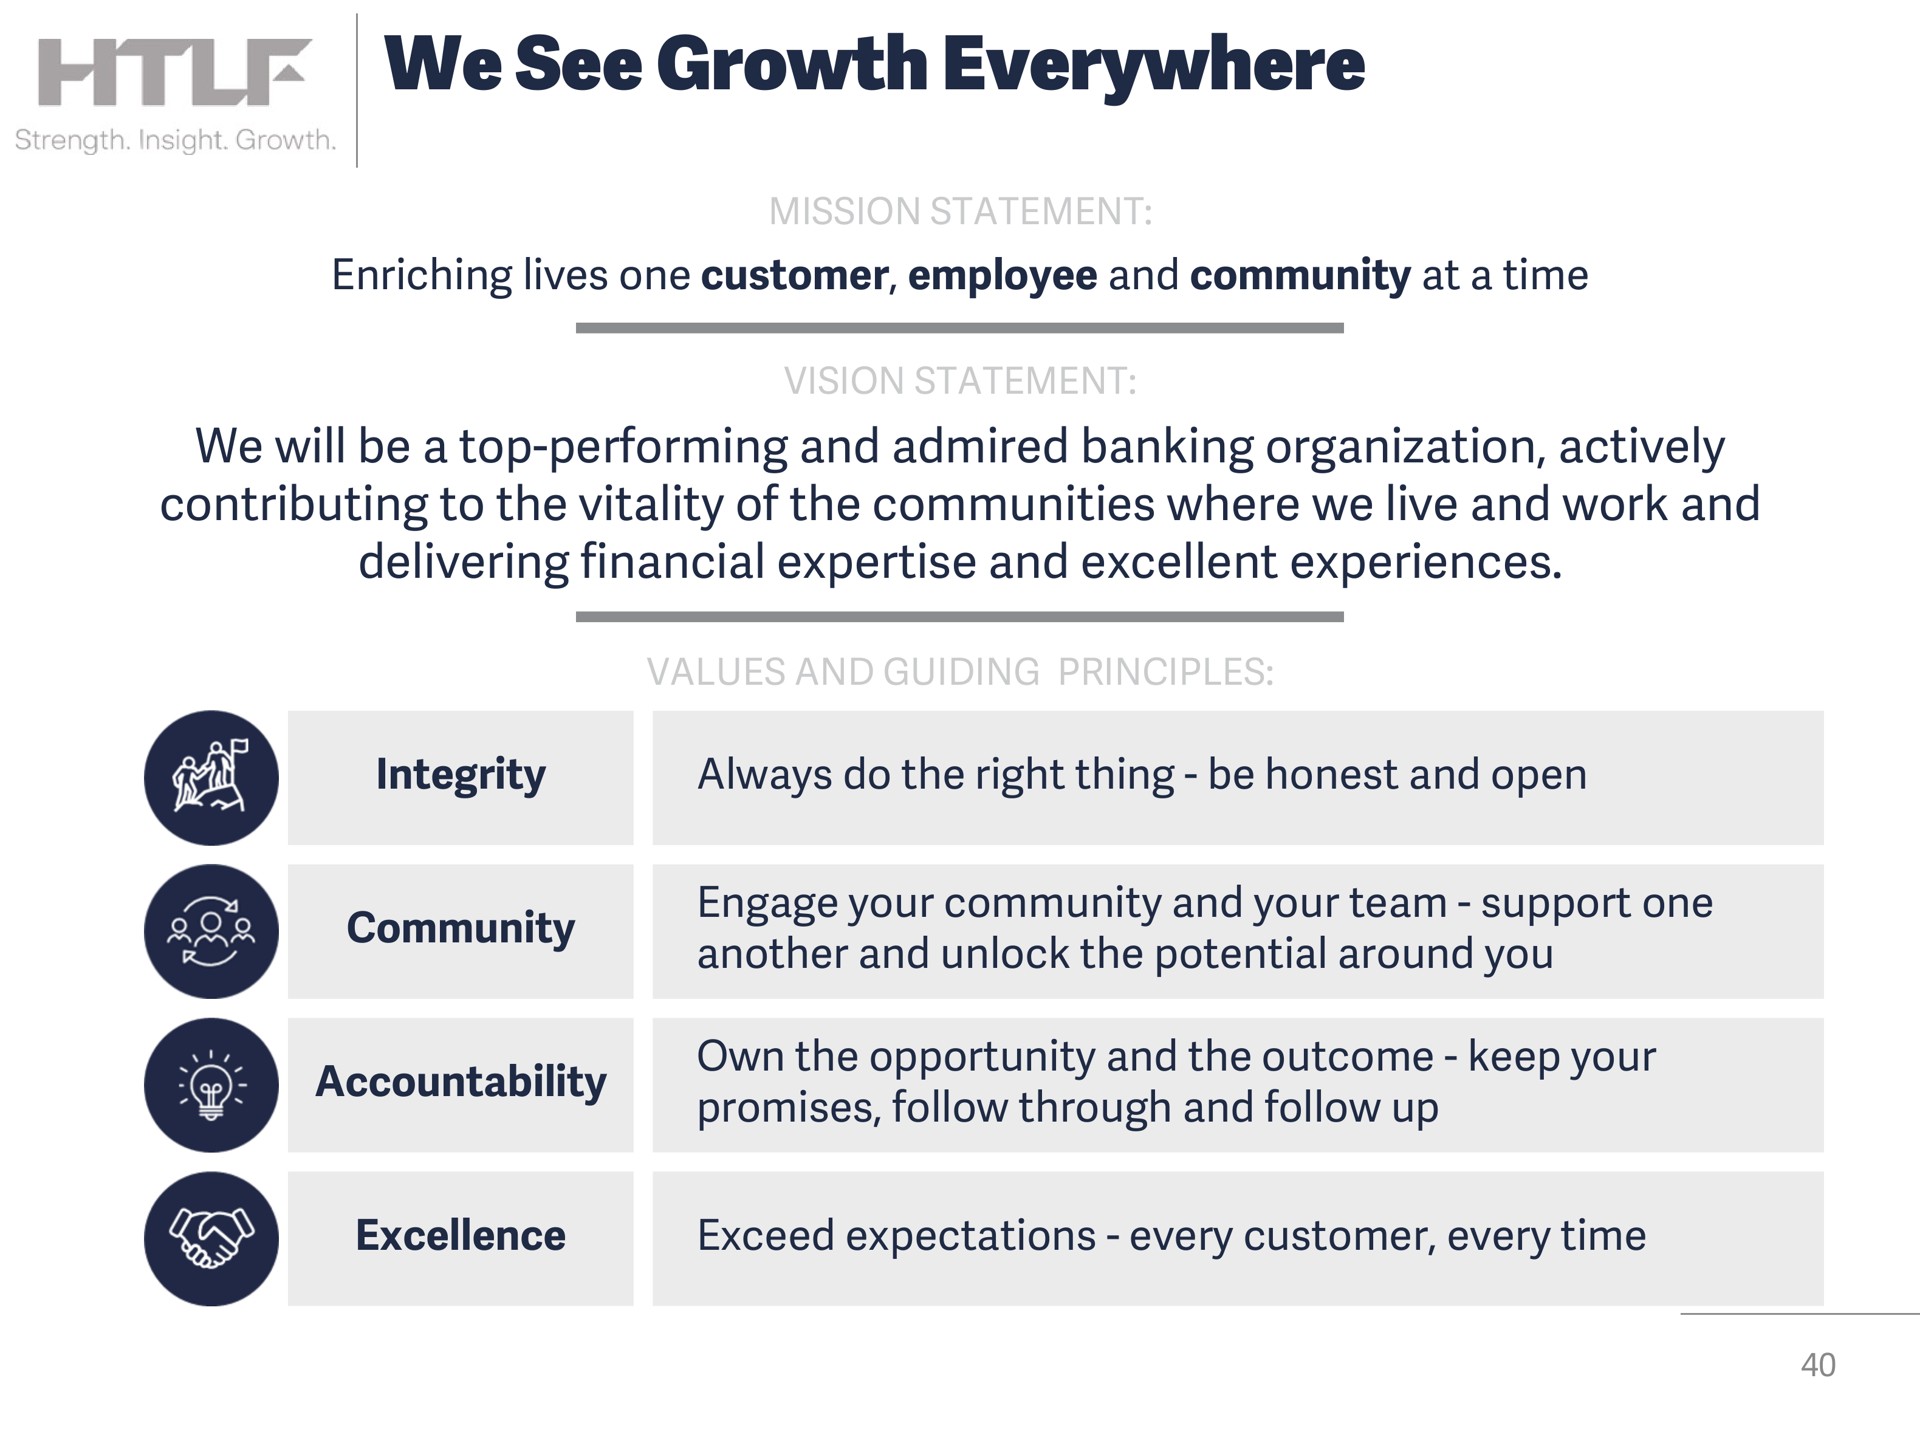 we see growth everywhere we will be a top performing and admired banking organization actively contributing to the vitality of the communities where we live and work and delivering financial and excellent experiences | Heartland Financial USA